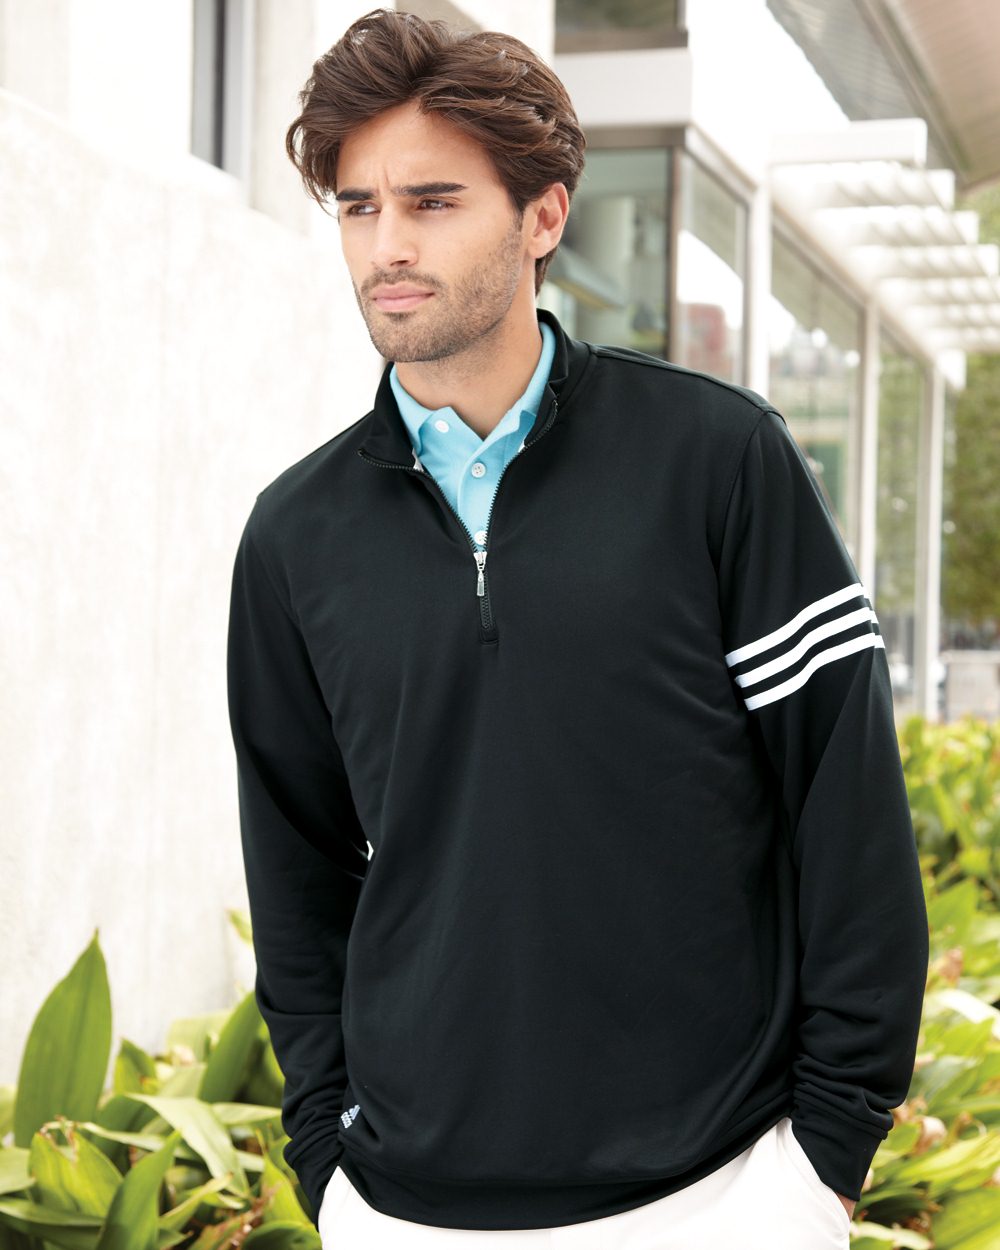 adidas climalite pullover